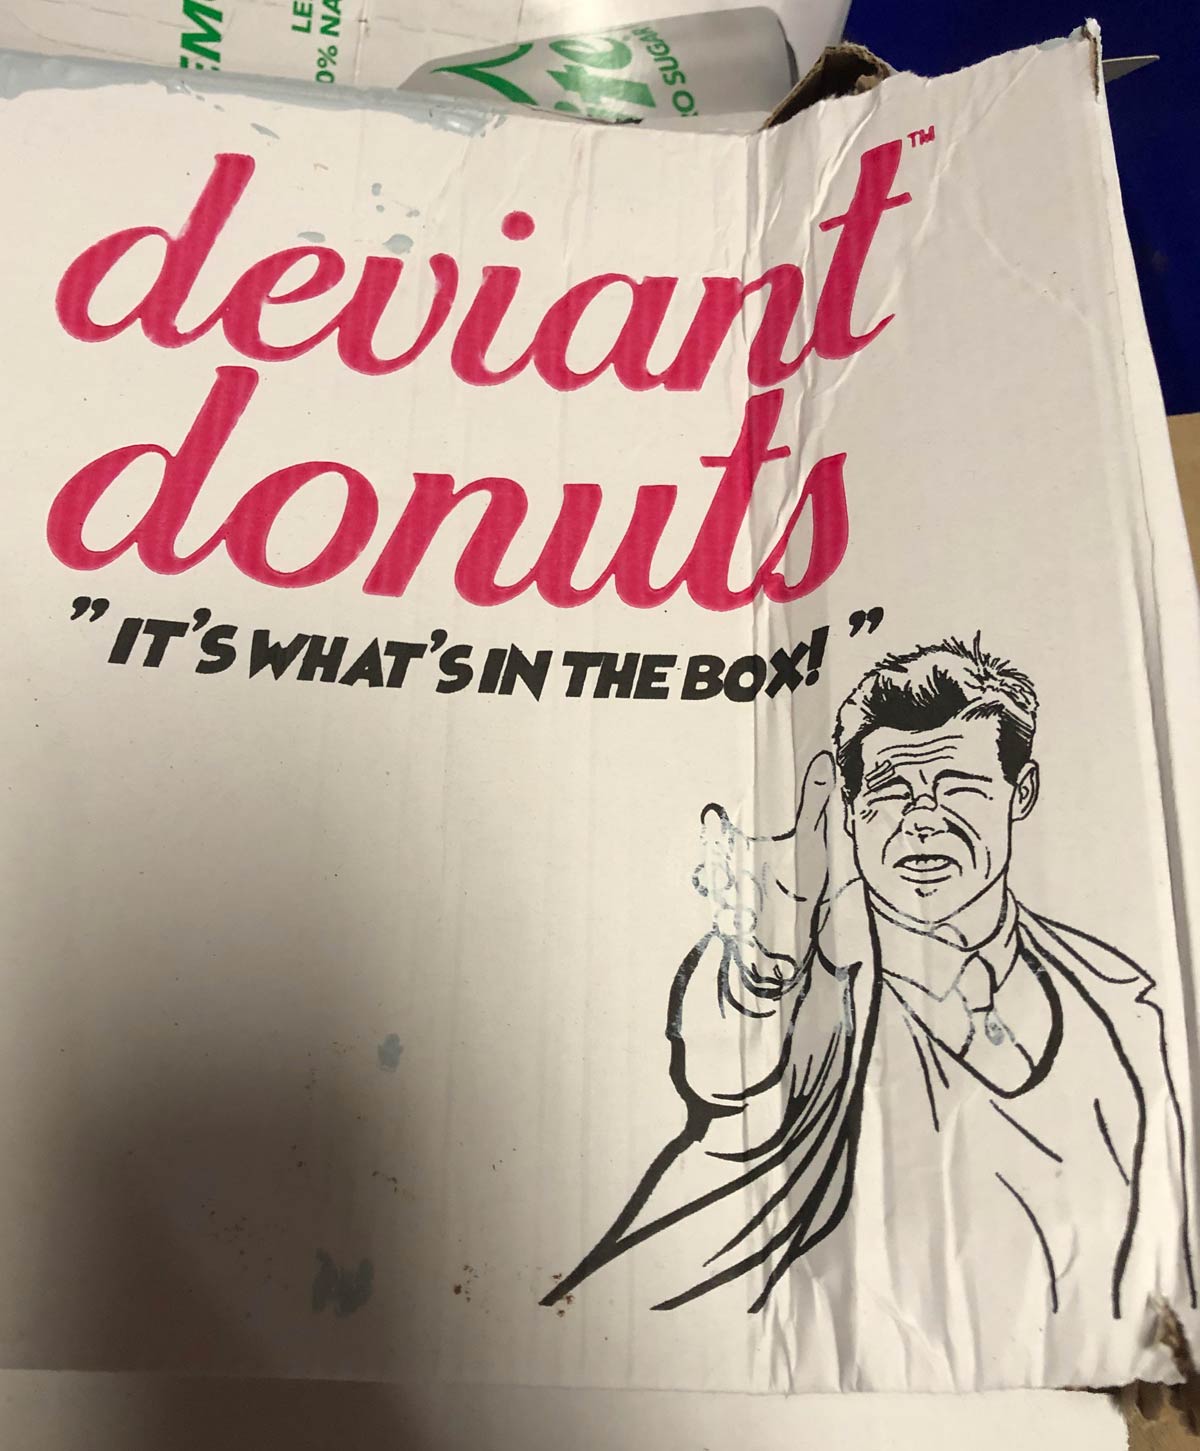 "What's in the box?!" My local donut shop's to go box